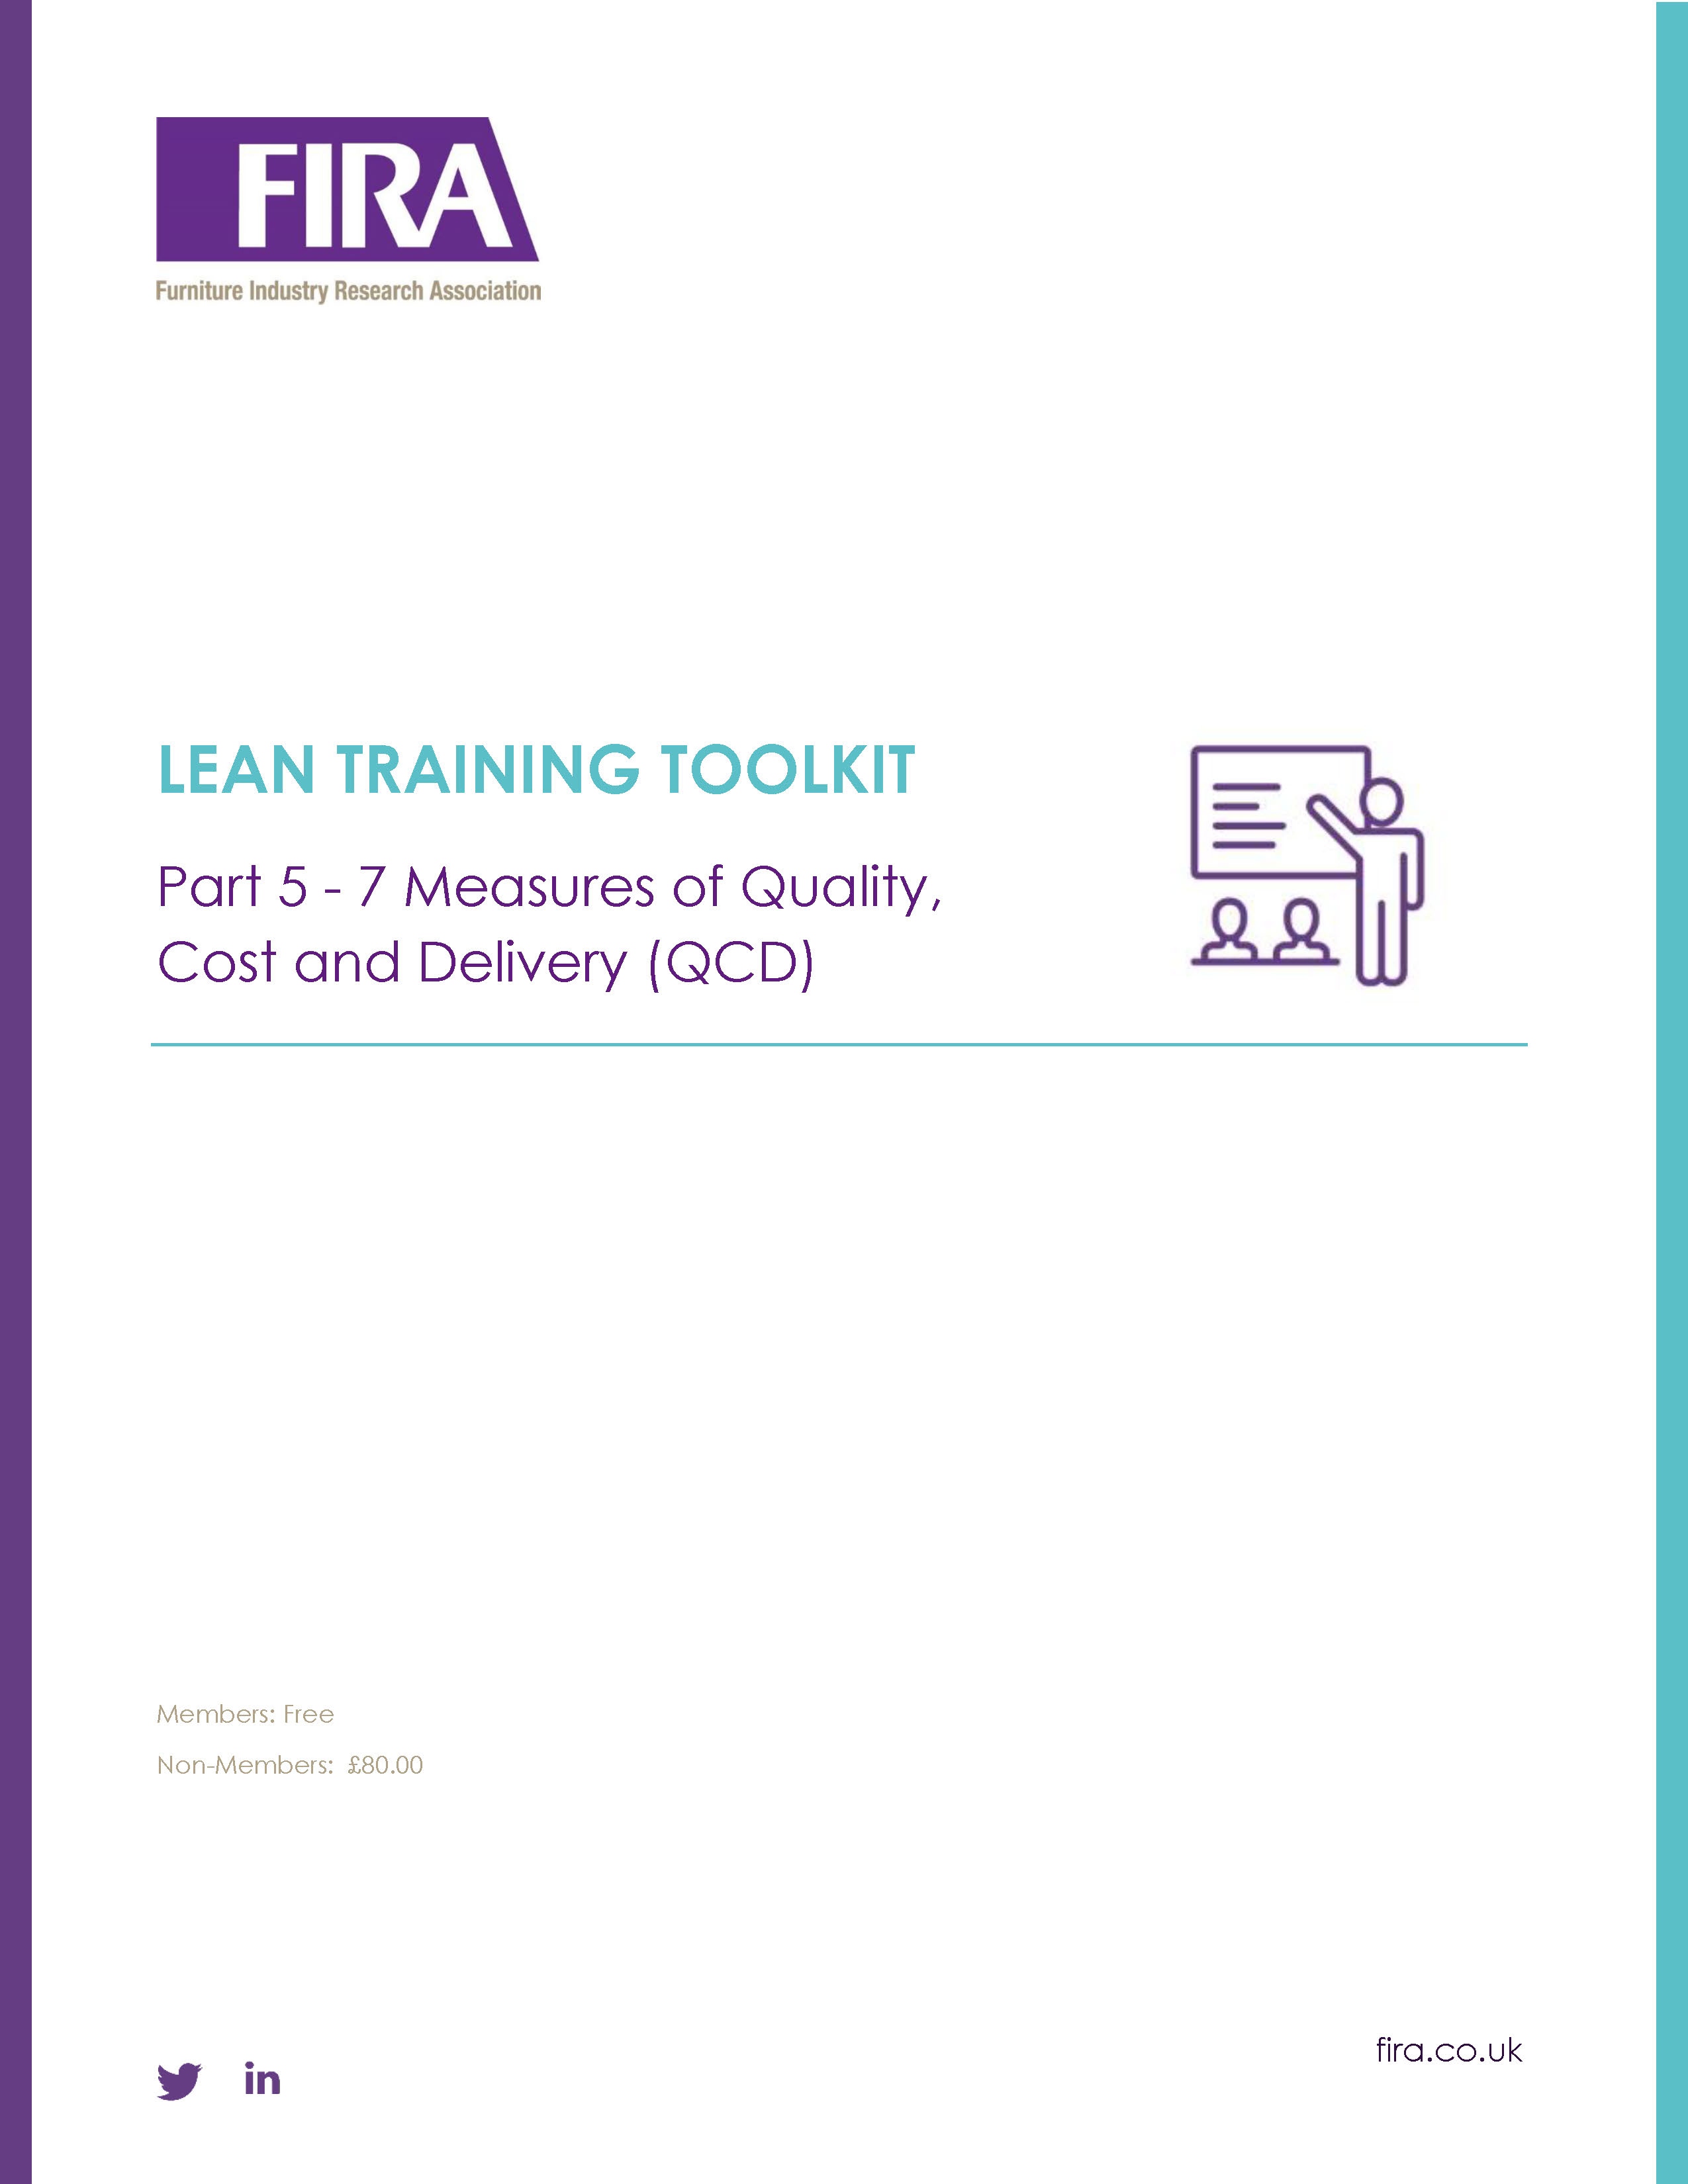 Lean Manufacturing Training Toolkit - Part 5 - 7 Measures of Quality, Cost and Delivery